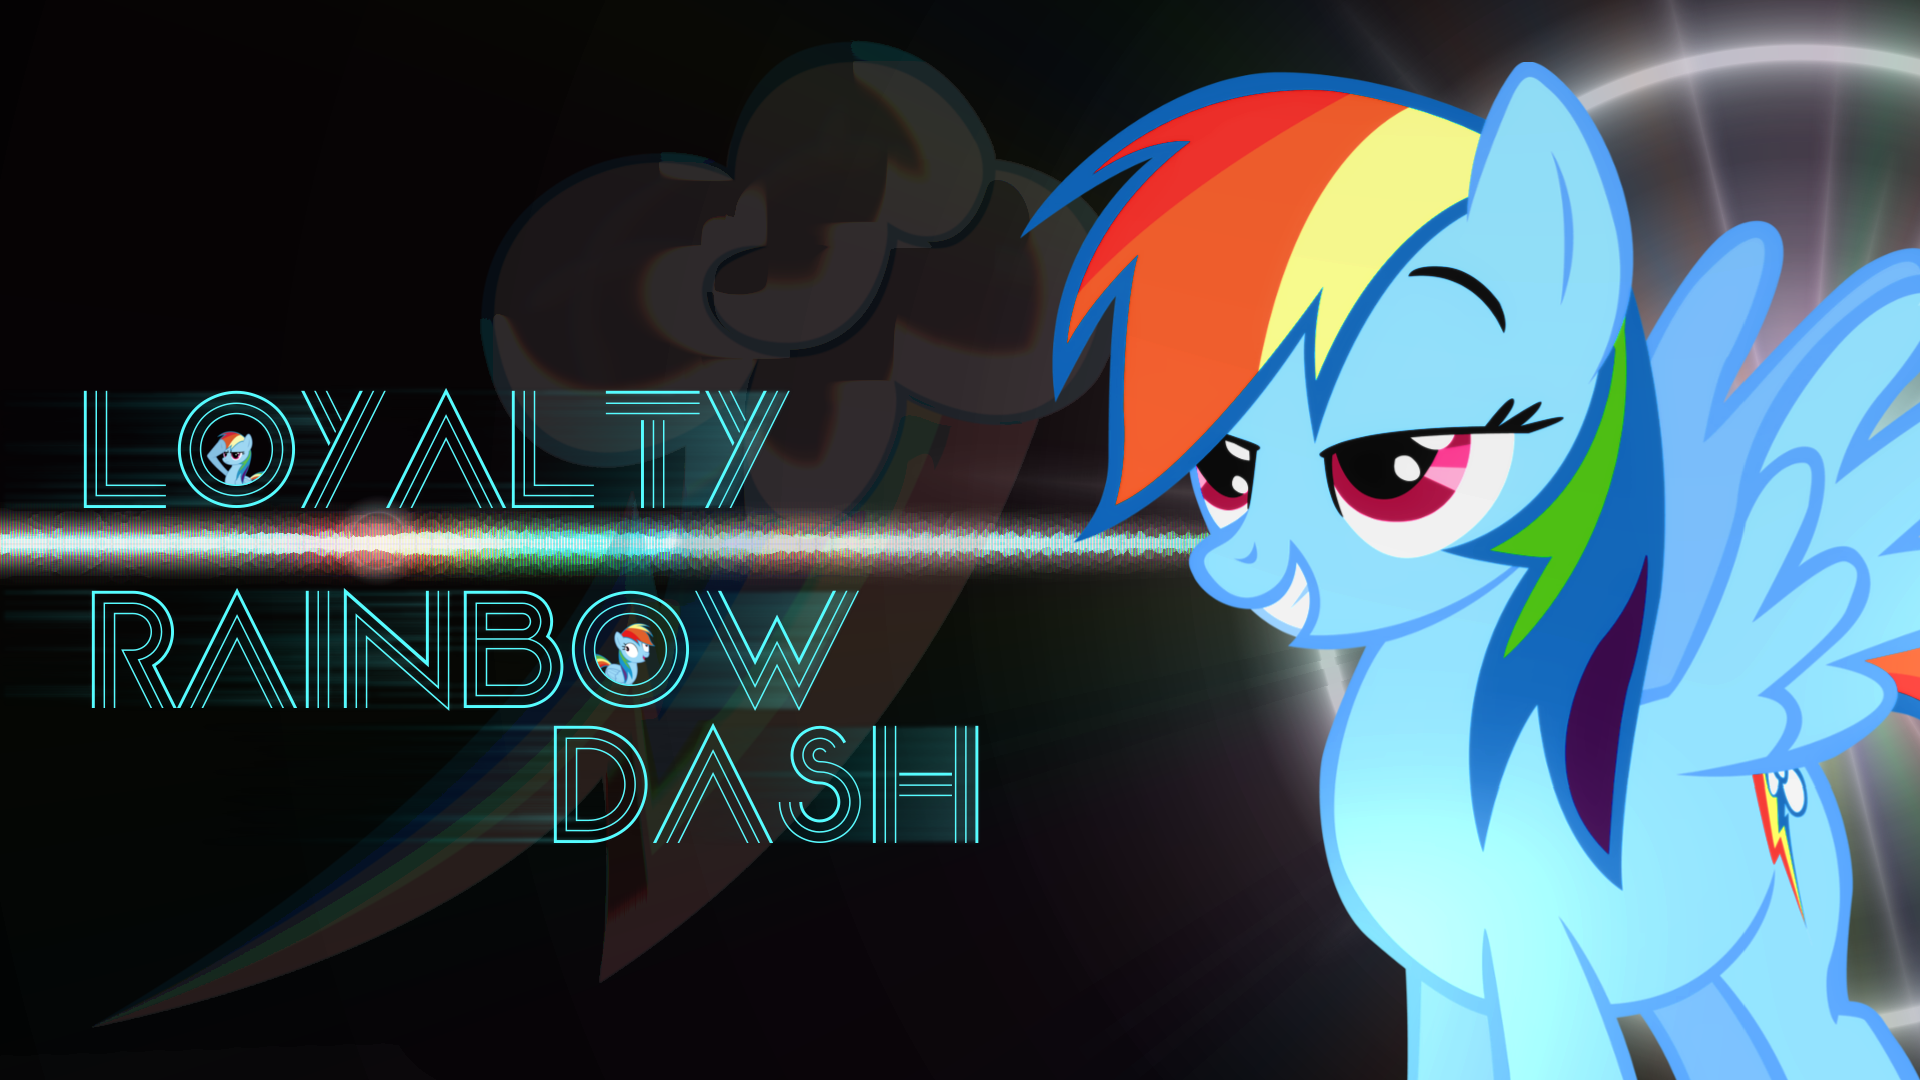 Shiny-shiny pretty lights wallpaper pack. by AtomicGreymon, BlackGryph0n, Clueless313, MoongazePonies and RainbowCrab